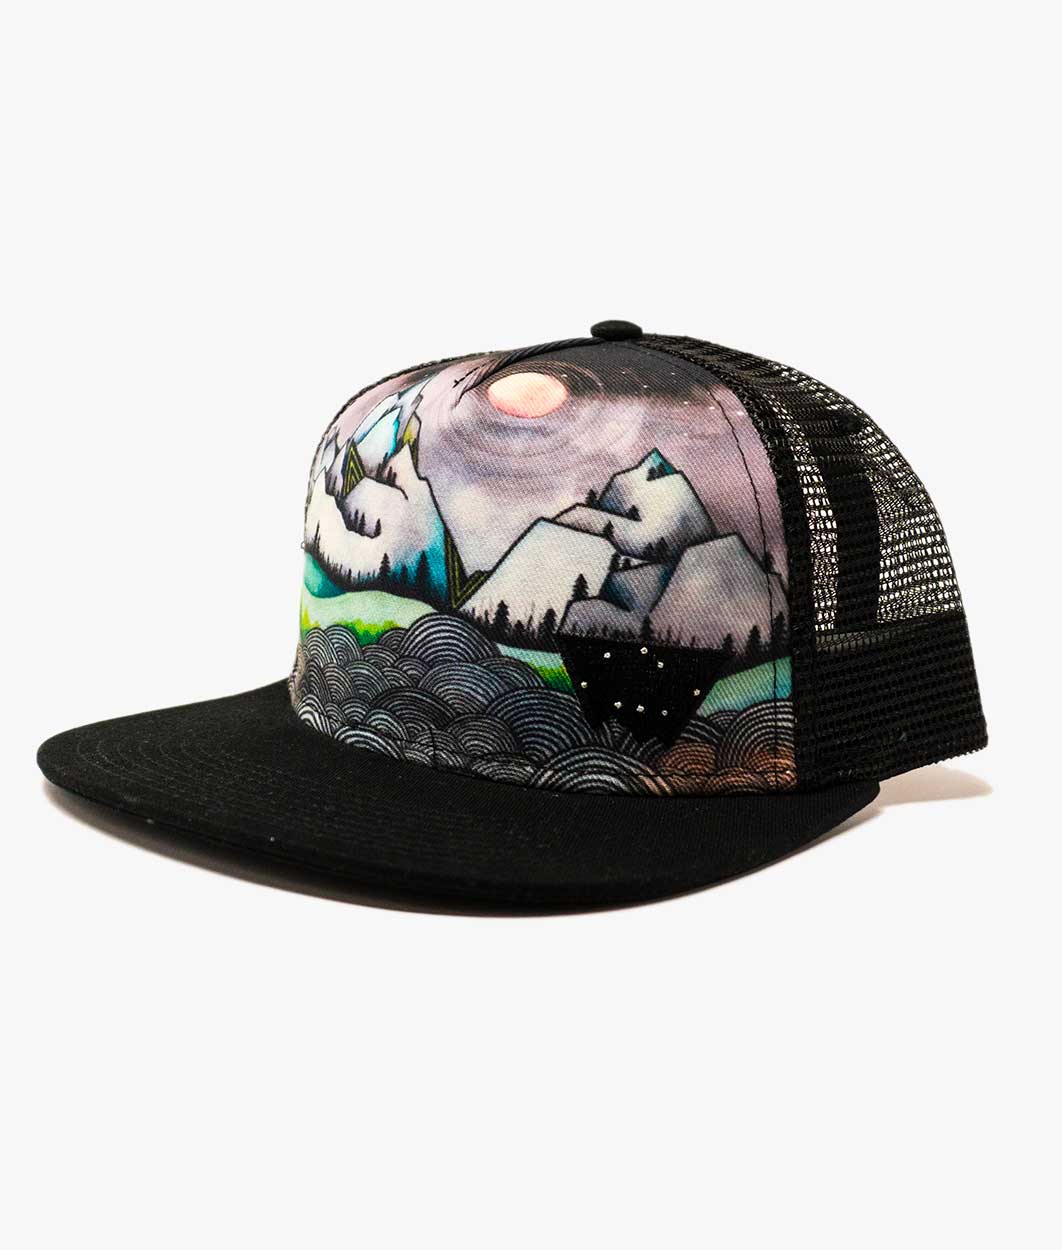 Flat Bill Trucker Snap Back Hat with Black Mesh and Bill featuring Elise Holme's Watercolor Painting of the Minaret Mountain Range